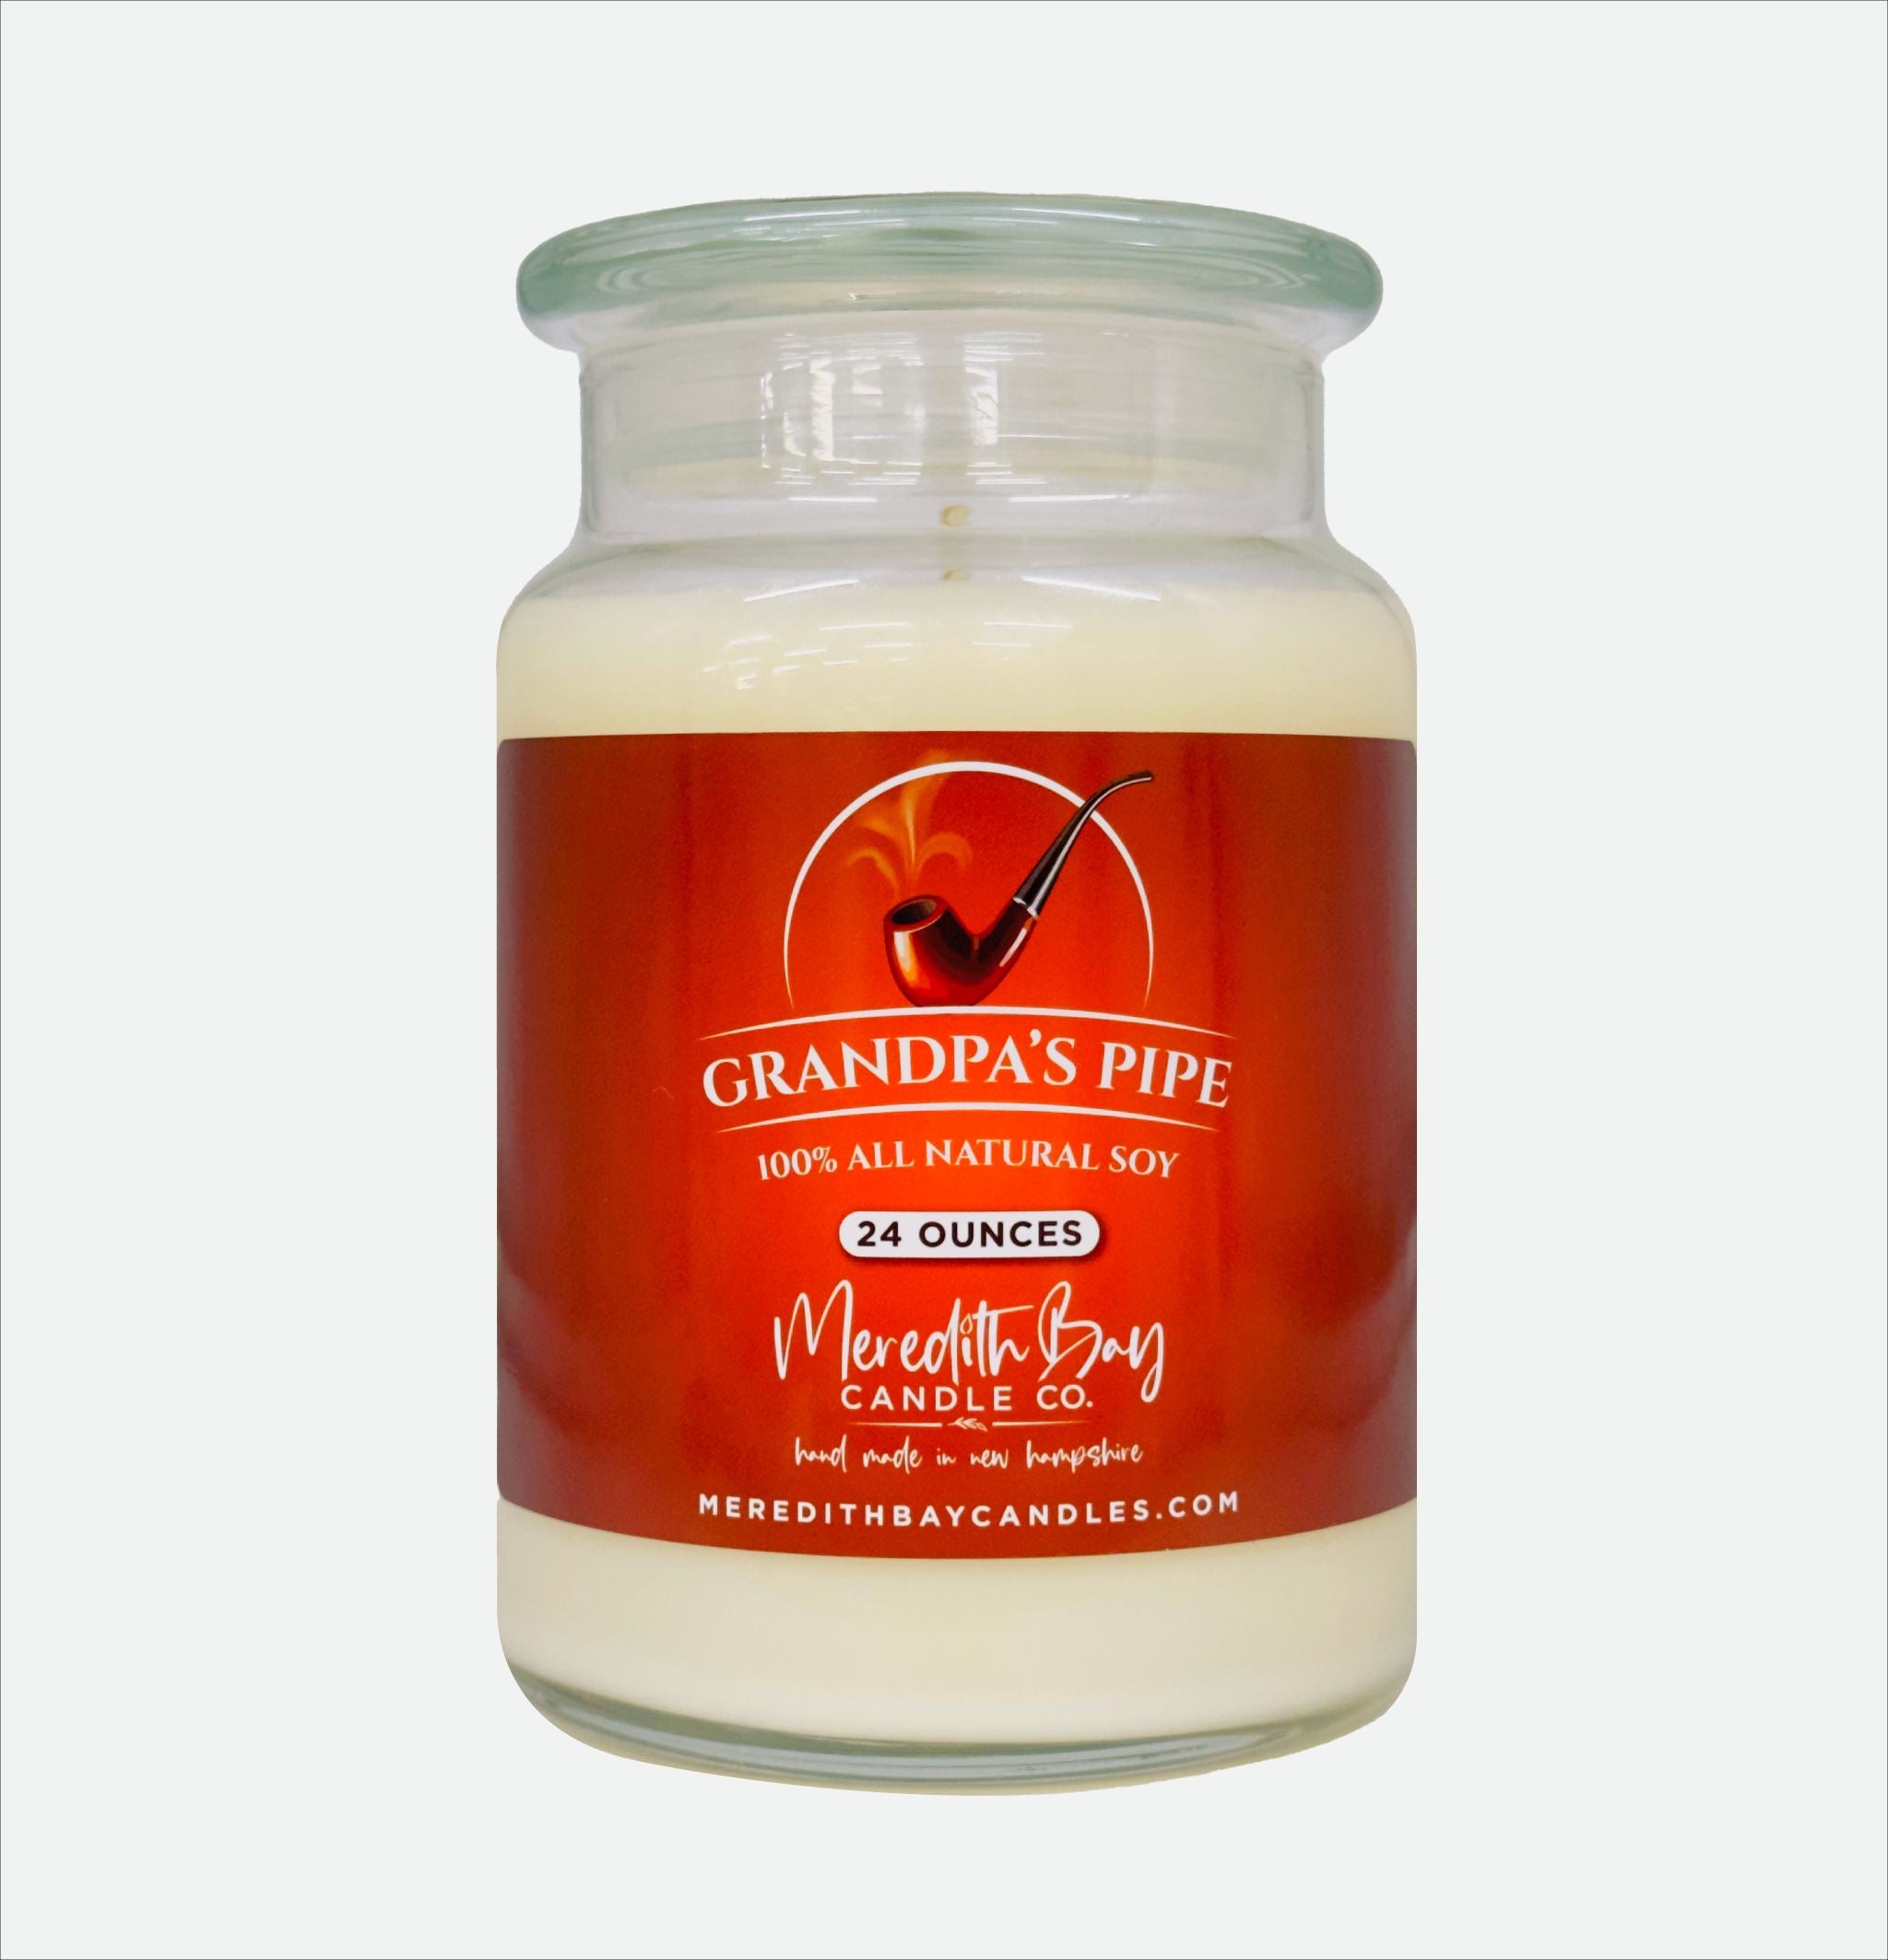 Grandpa's Pipe Soy Candle Meredith Bay Candle Co 24 Oz 